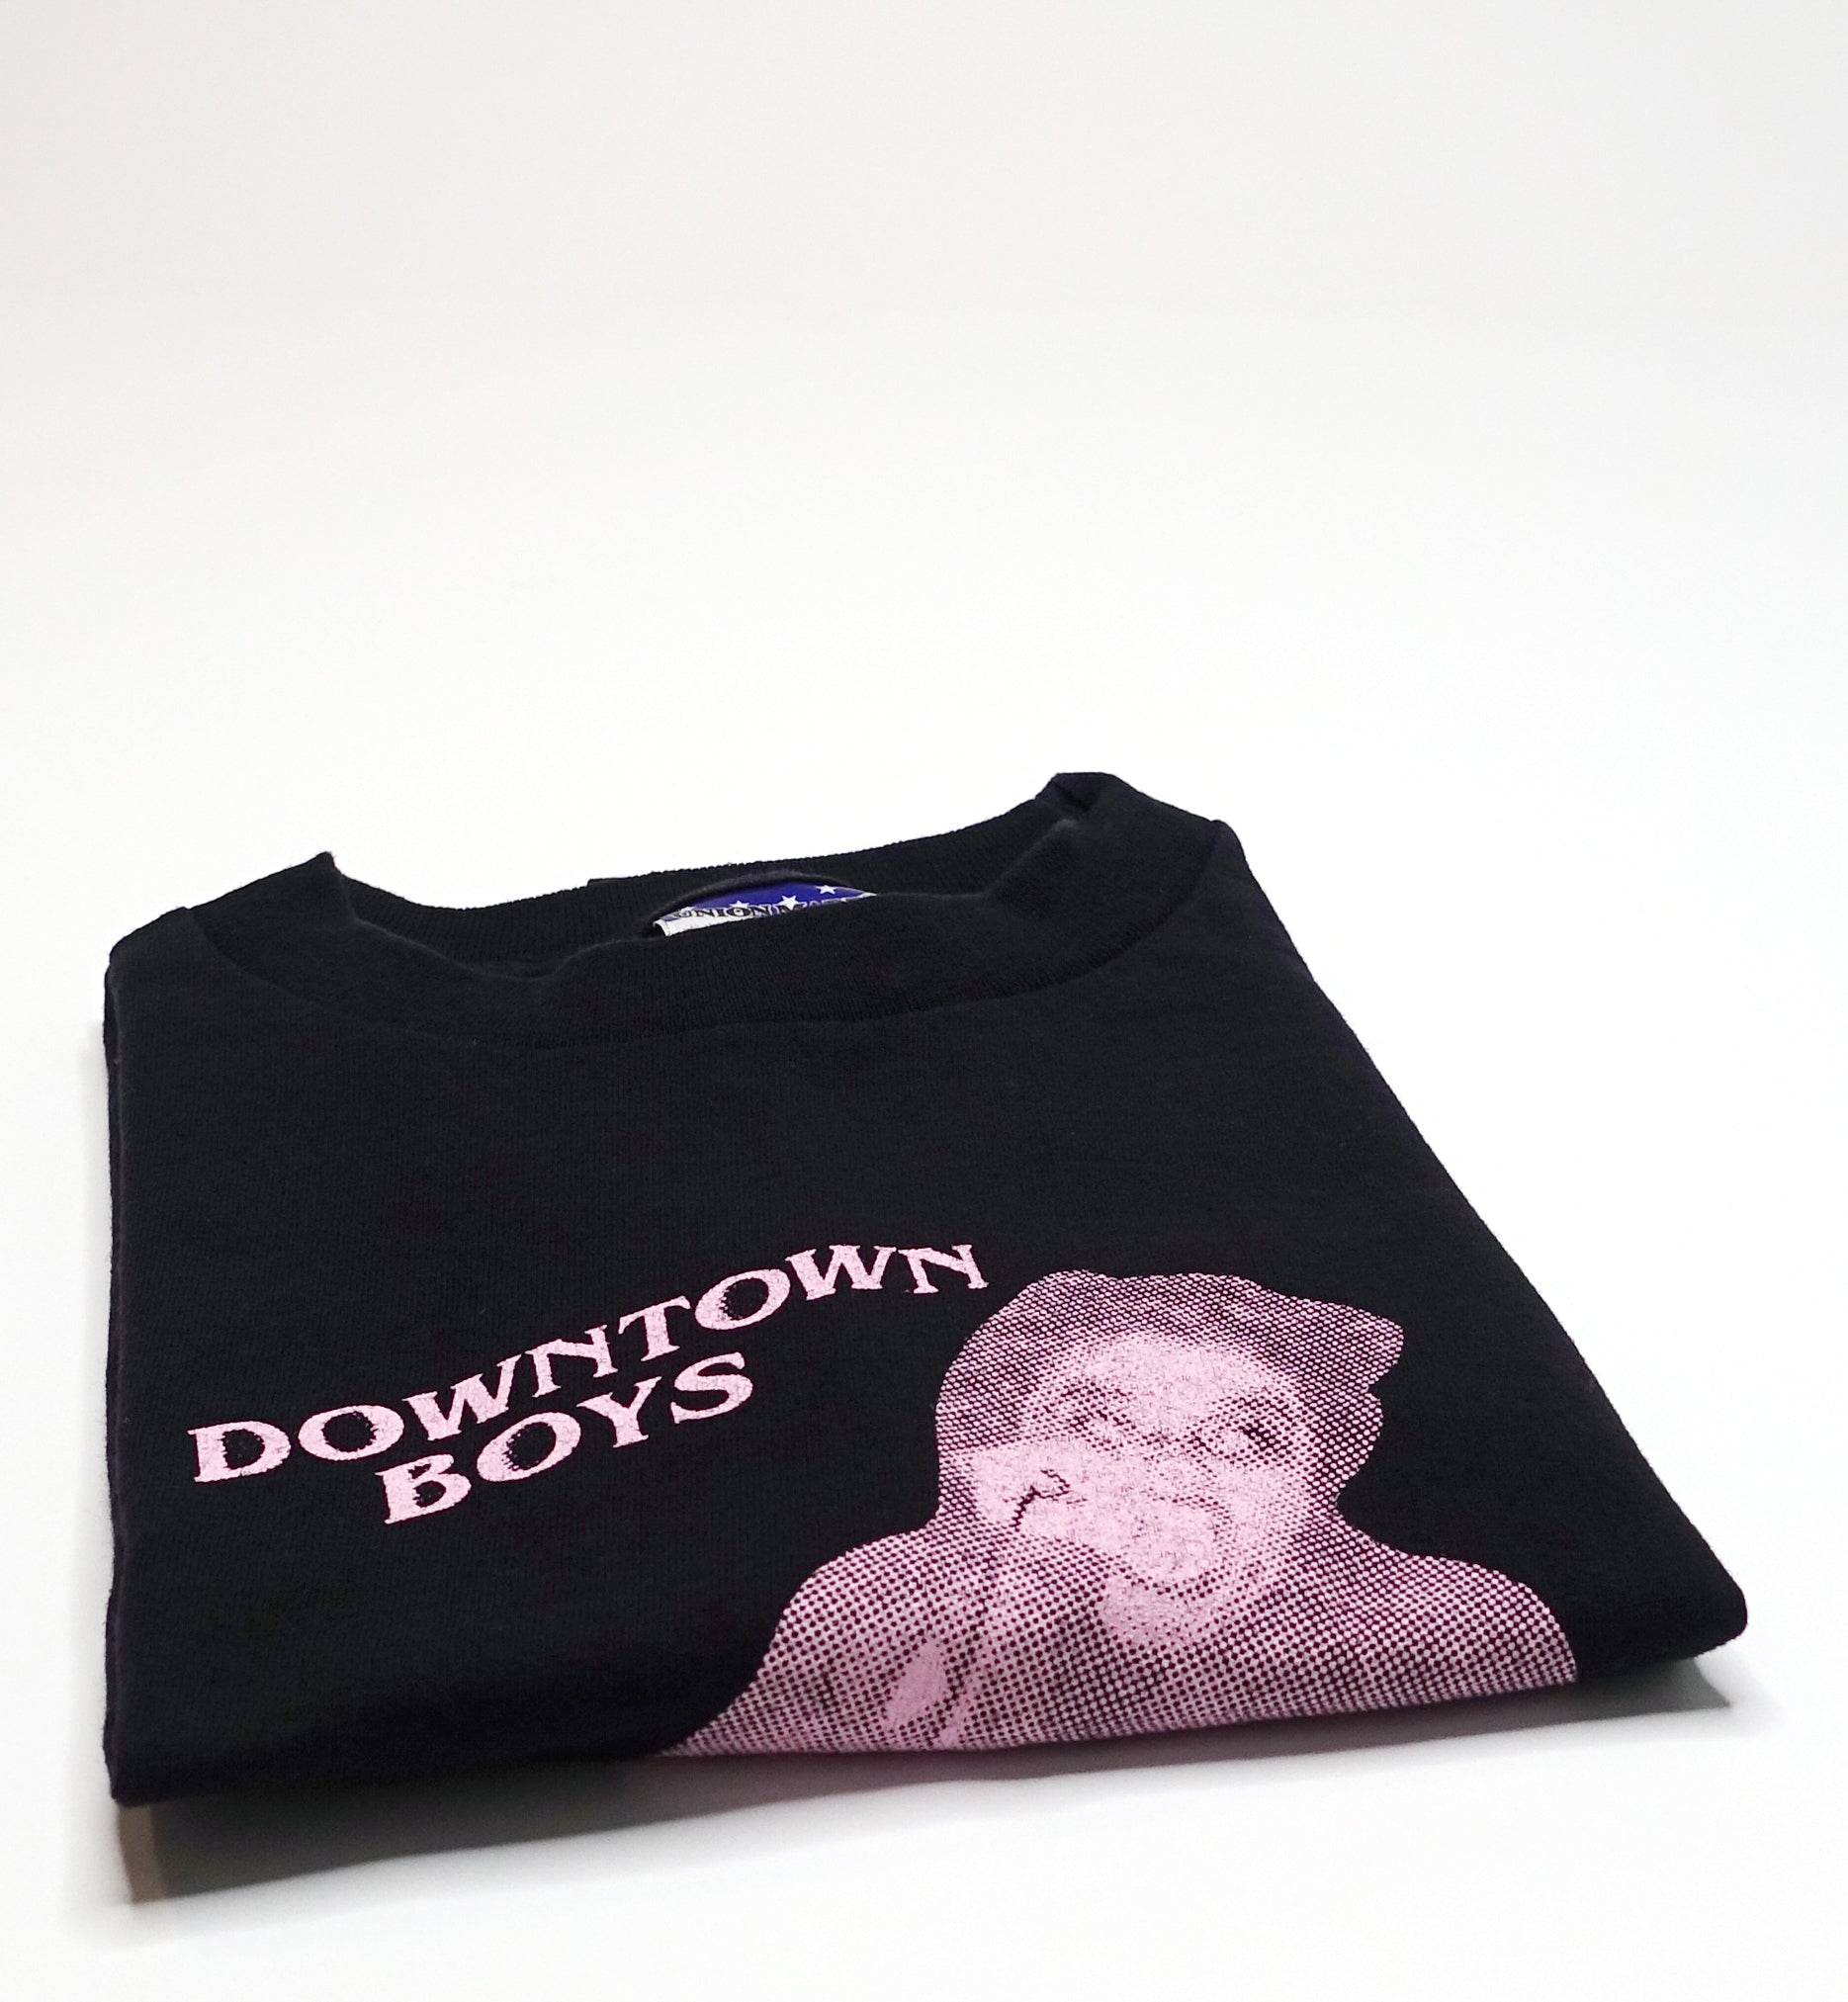 Downtown Boys - Self Titled 2014 Tour Shirt Size Small